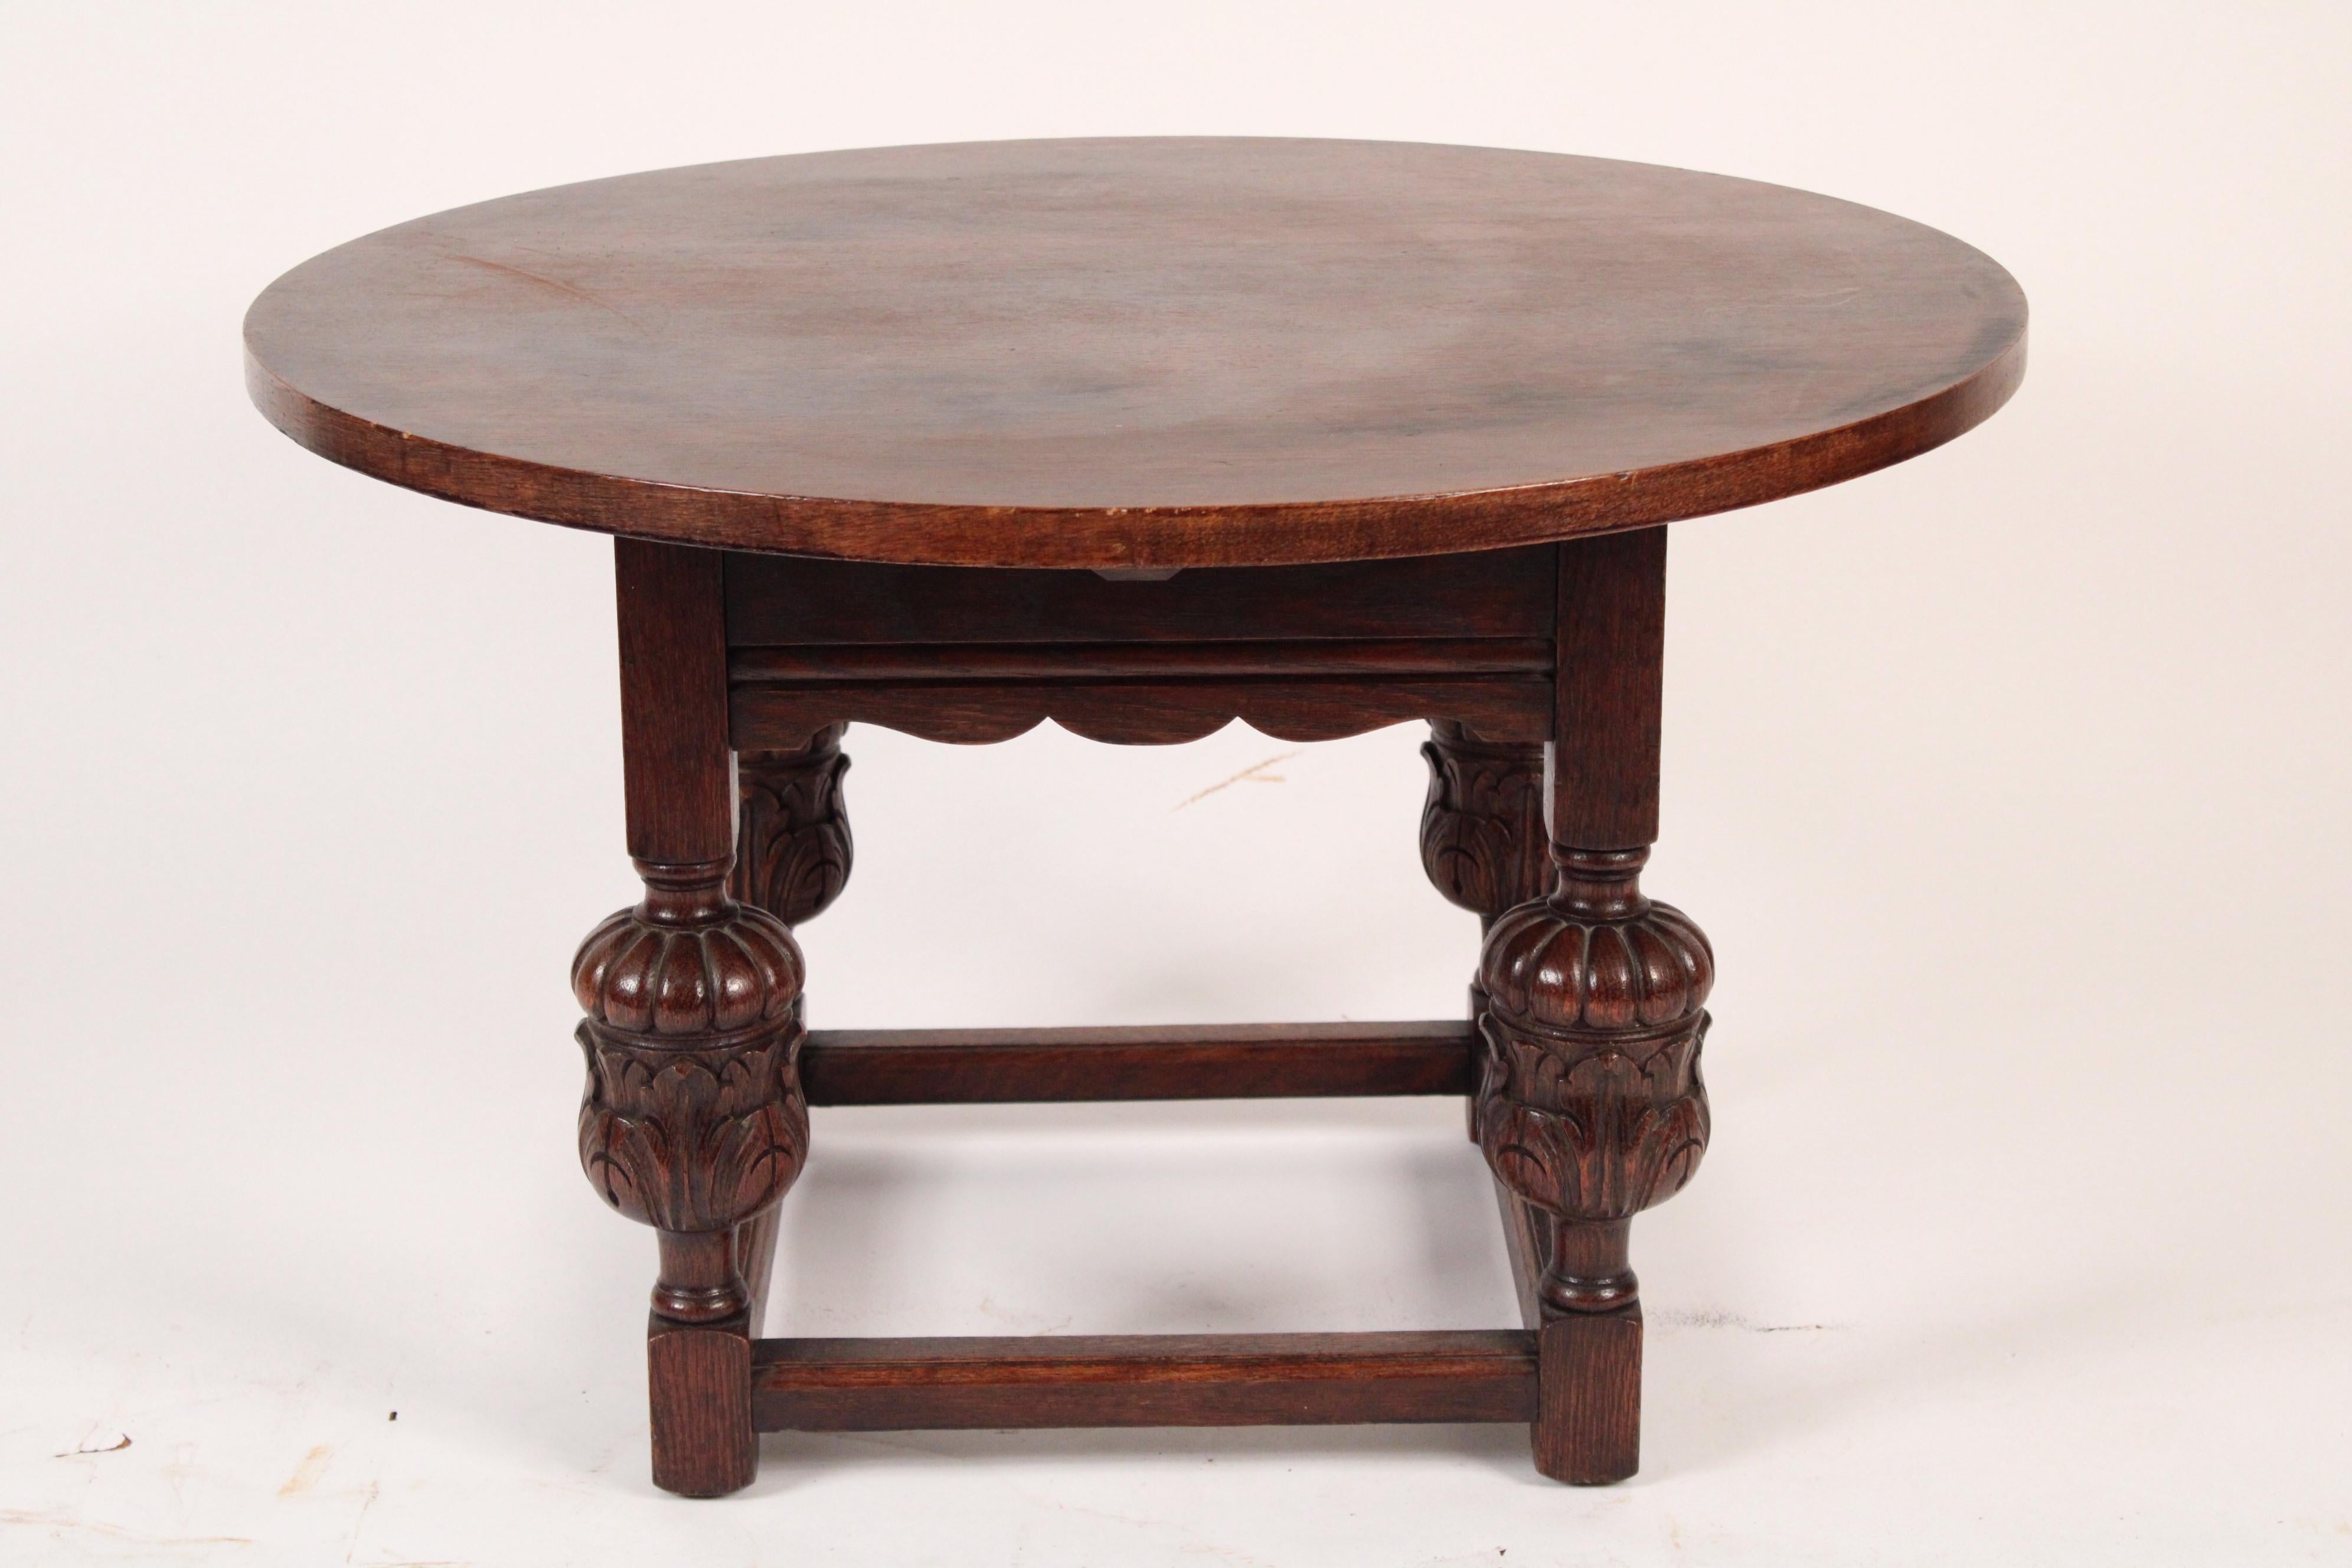 Spanish revival round oak coffee table, circa 1930. With a round top and four bulbous carved oak legs.